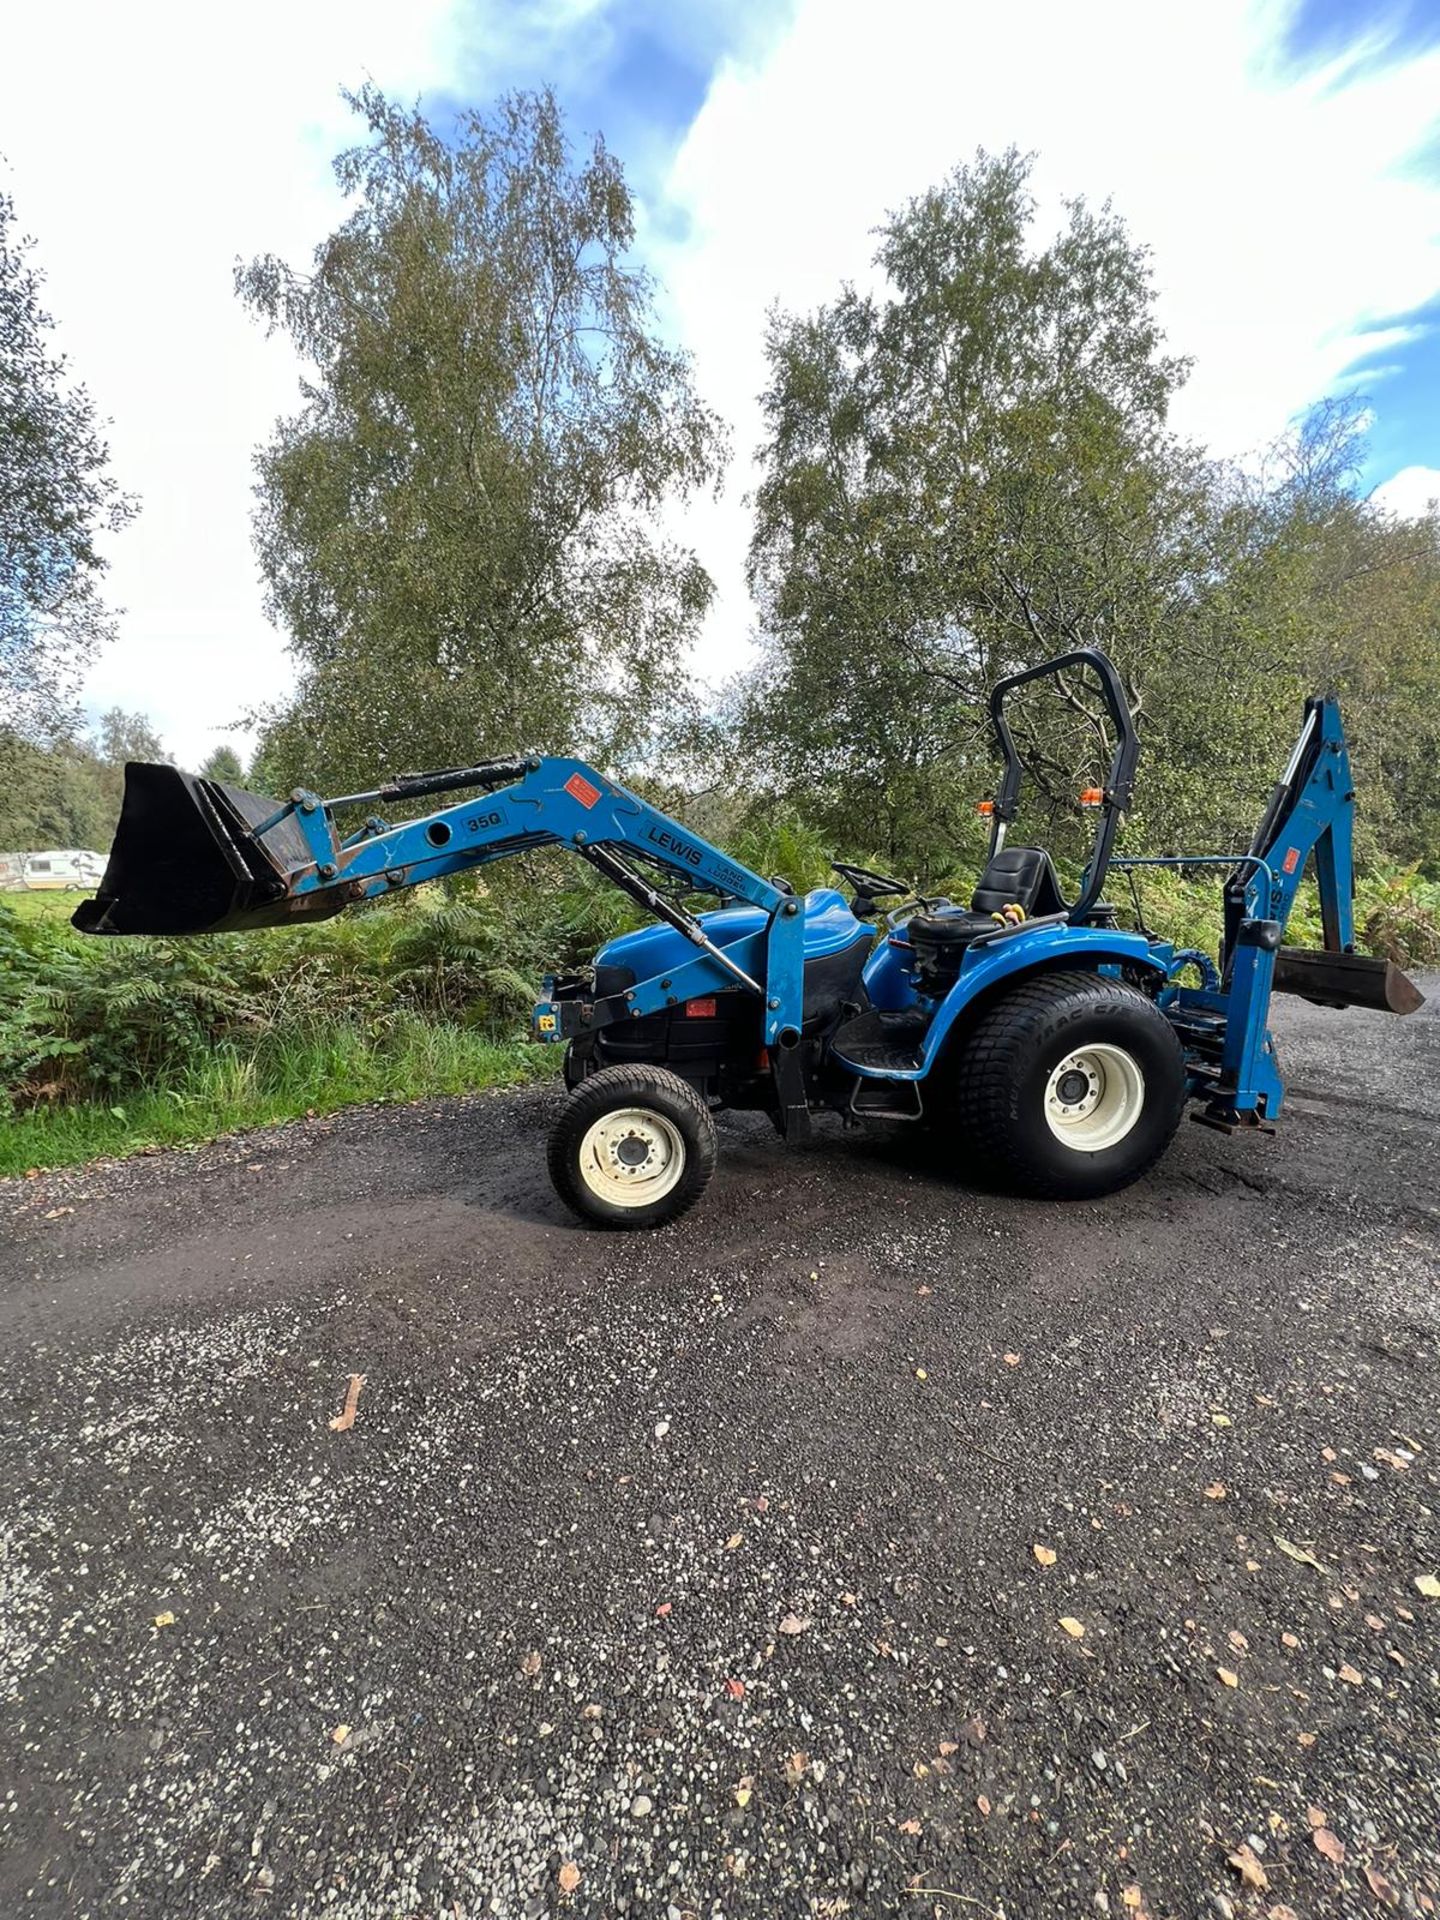 NEW HOLLAND TC27D BACK LOADER, SPOOL VALVE, ROLL PTO - Image 18 of 23